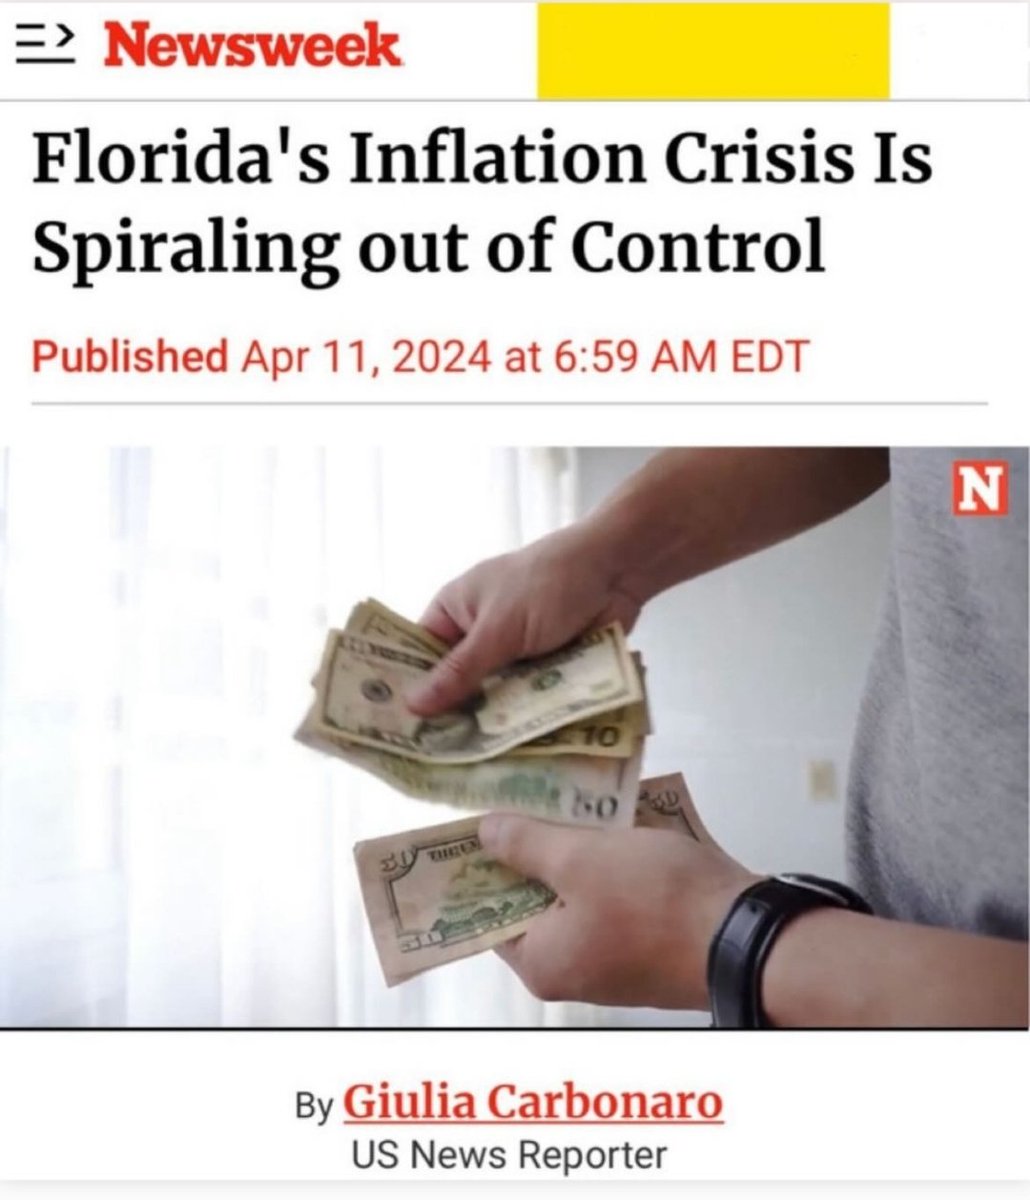 @DemsKeys The cost of insurance in Florida affects the cost of EVERYTHING! We need to start calling it, #FloridaFlation Floridians think inflation is this bad everywhere. IT'S NOT!